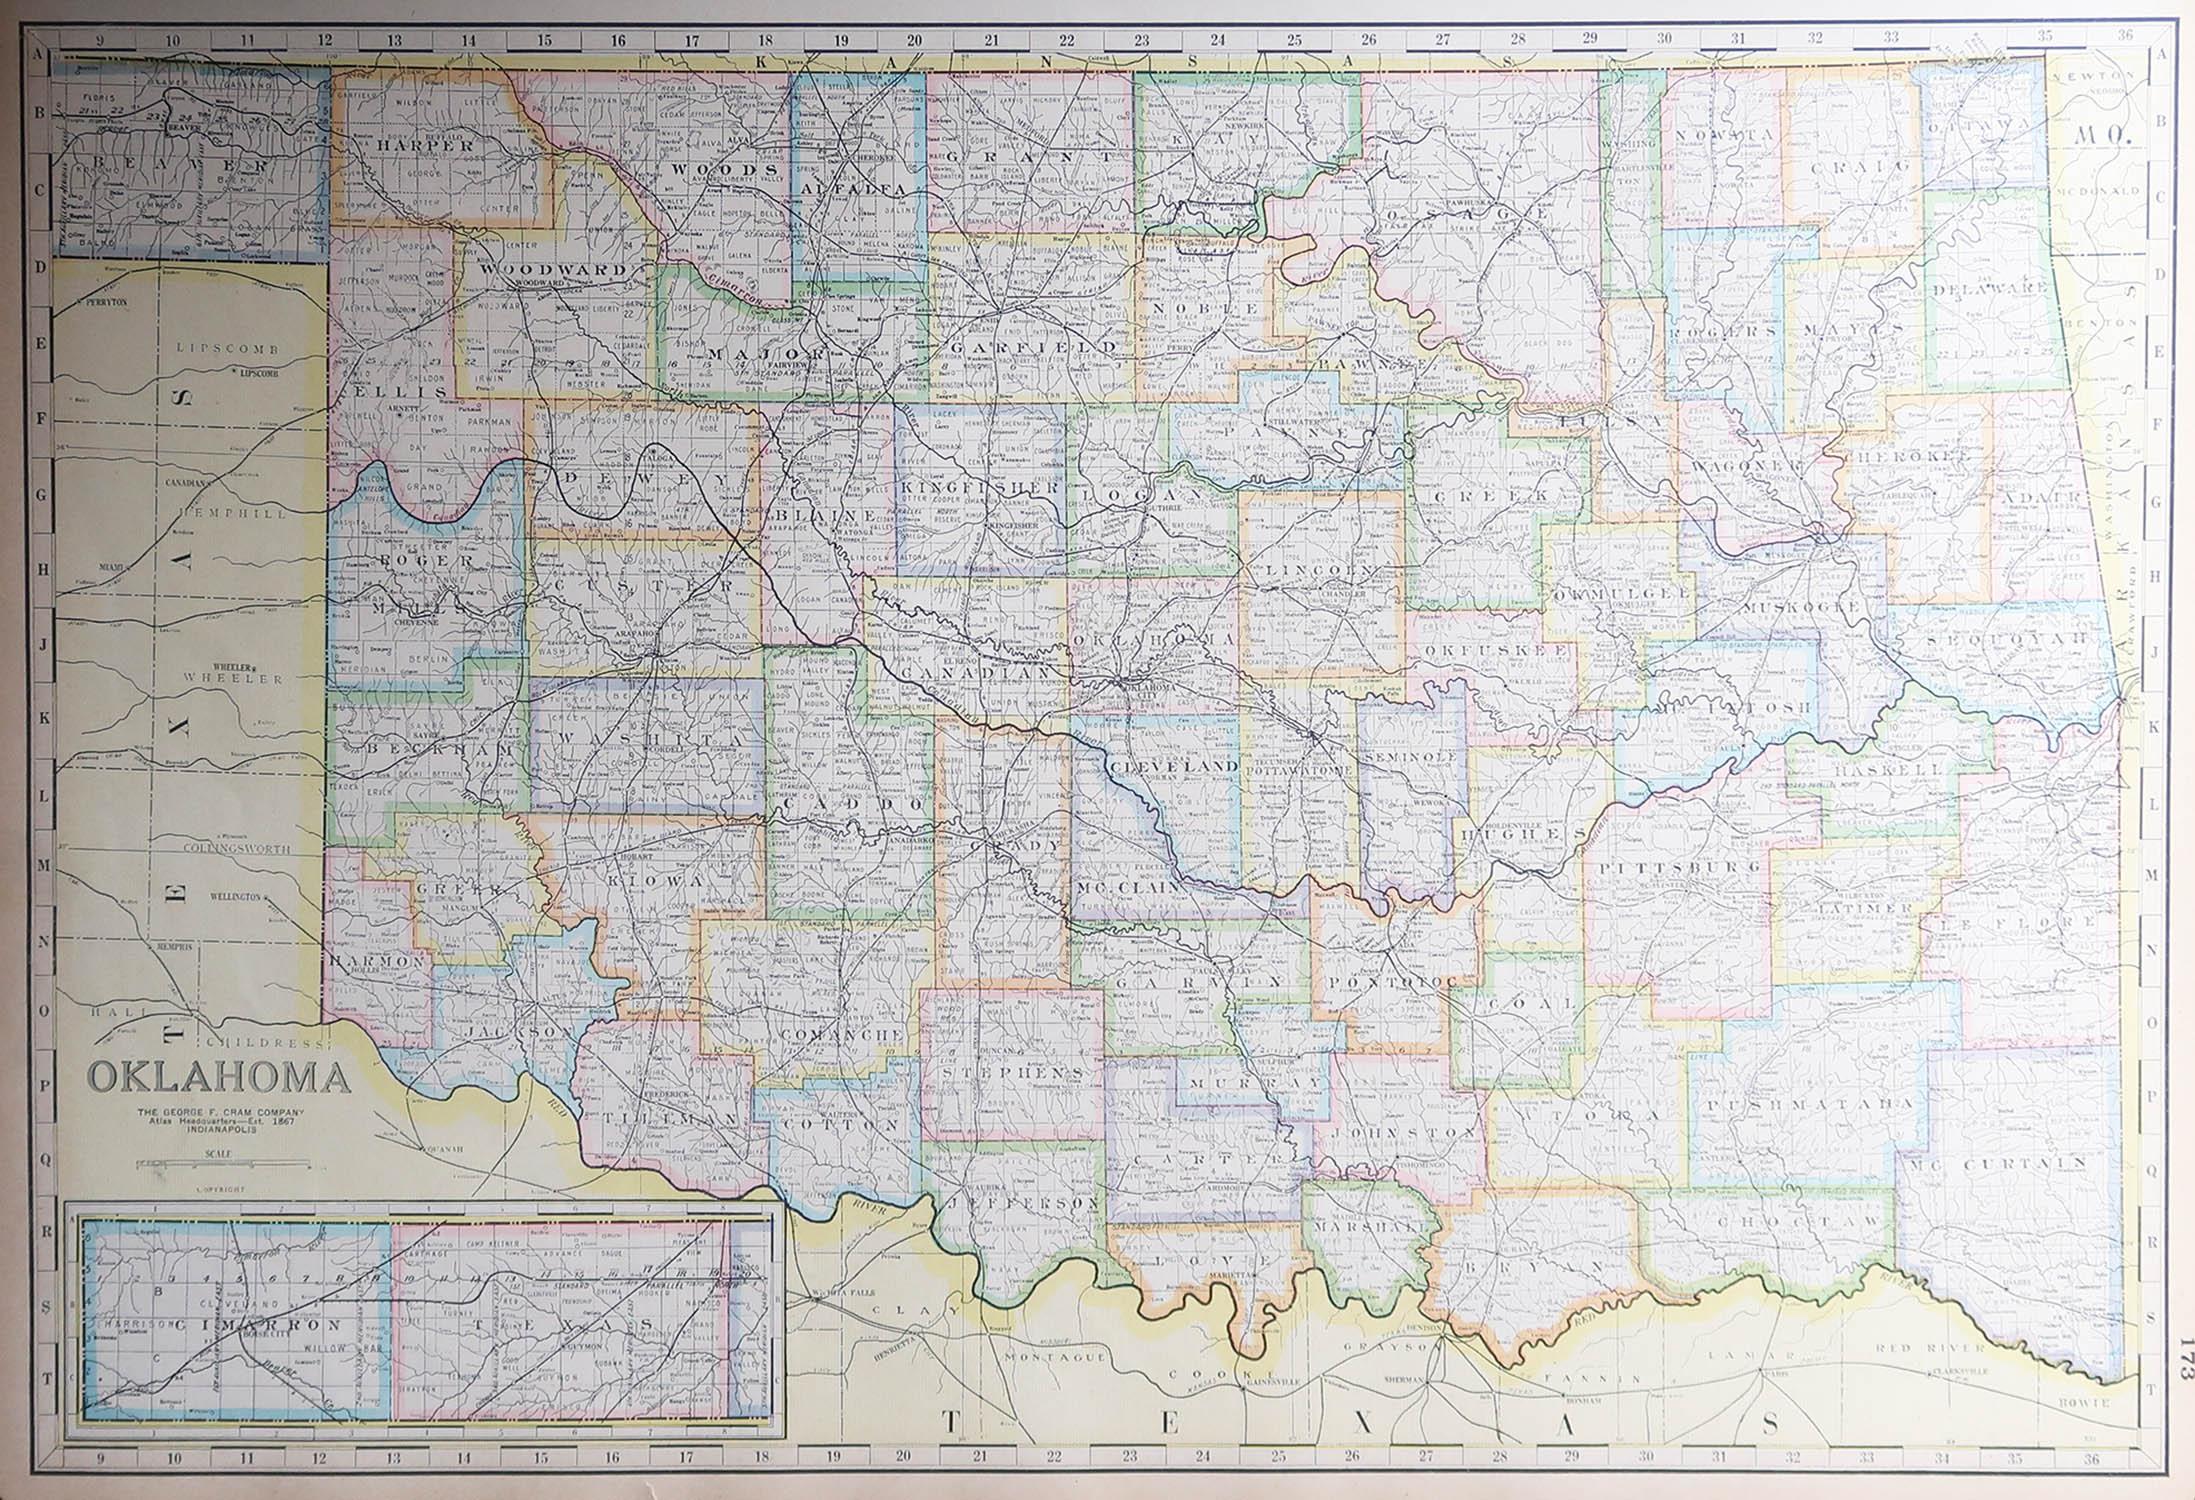 Fabulous map of Oklahoma

Original color

Engraved and printed by the George F. Cram Company, Indianapolis.

Published, circa 1900

Unframed

Repair to a minor edge tear top left corner

Free shipping.